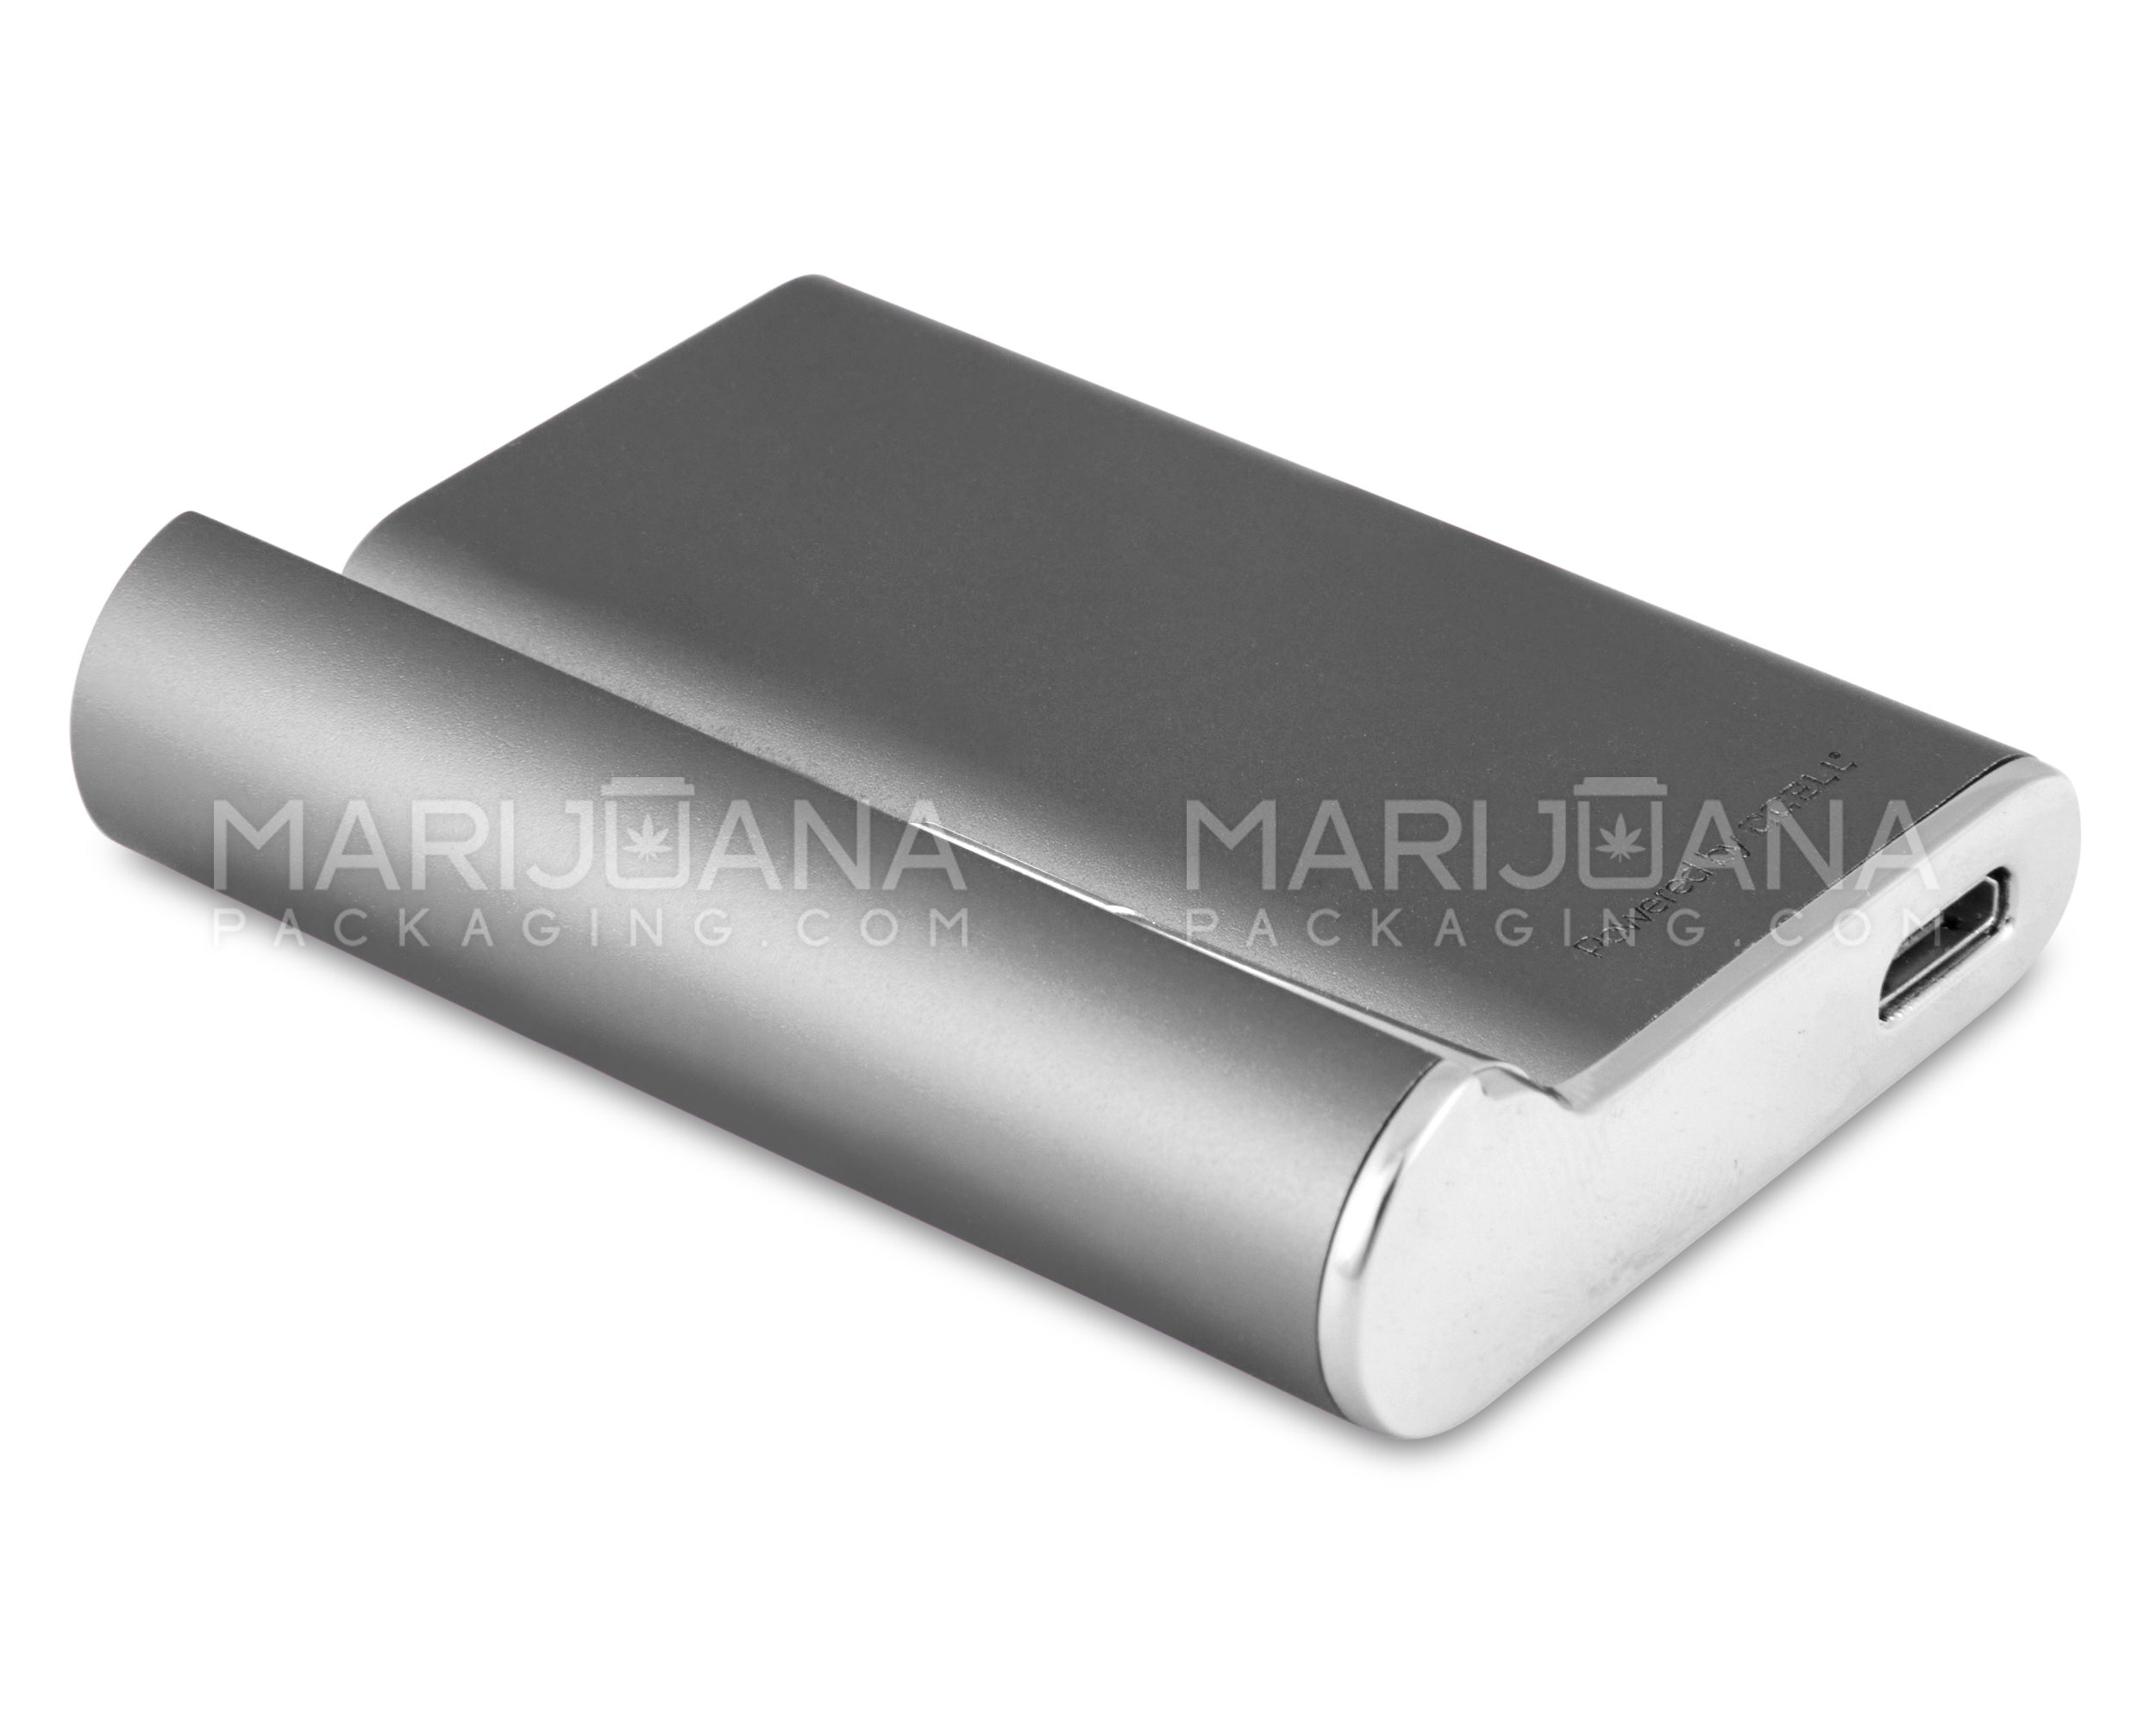 CCELL | Palm Vape Battery with USB Charger | 500mAh - Gray - 510 Thread - 3